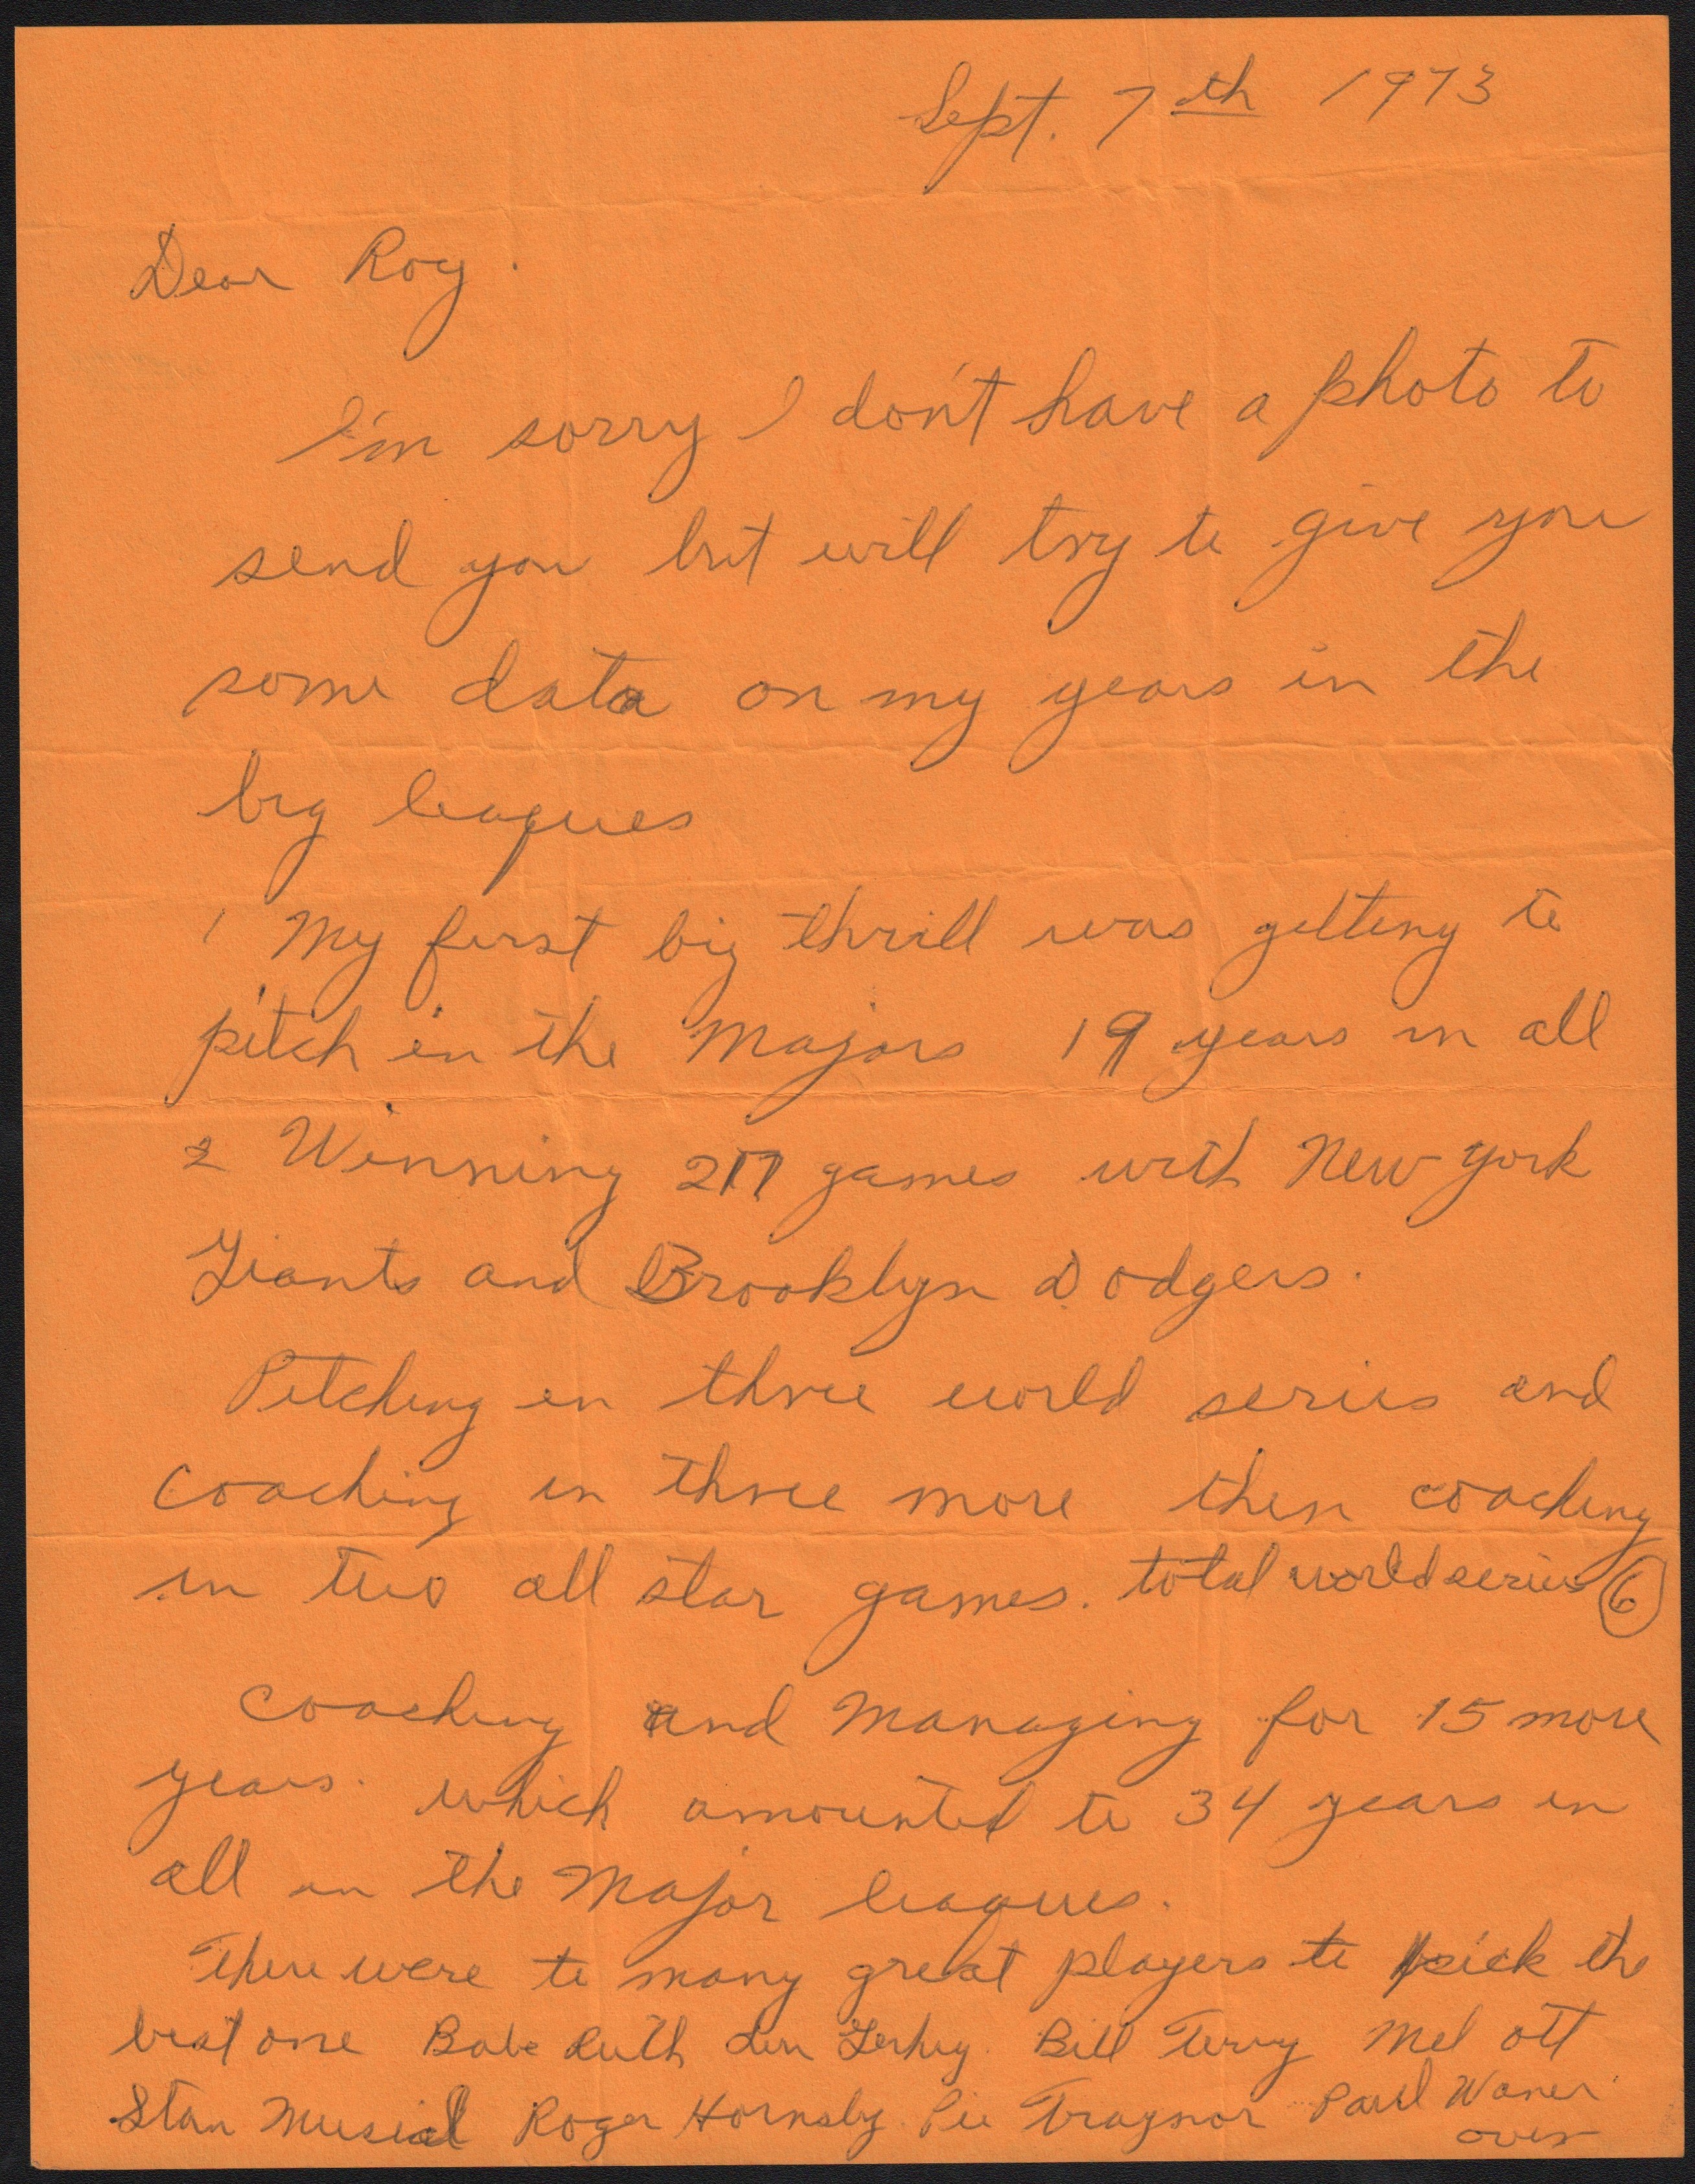 Baseball Autographs - 1973 Fred Fitzsimmons Handwritten Letter with Babe Ruth Content